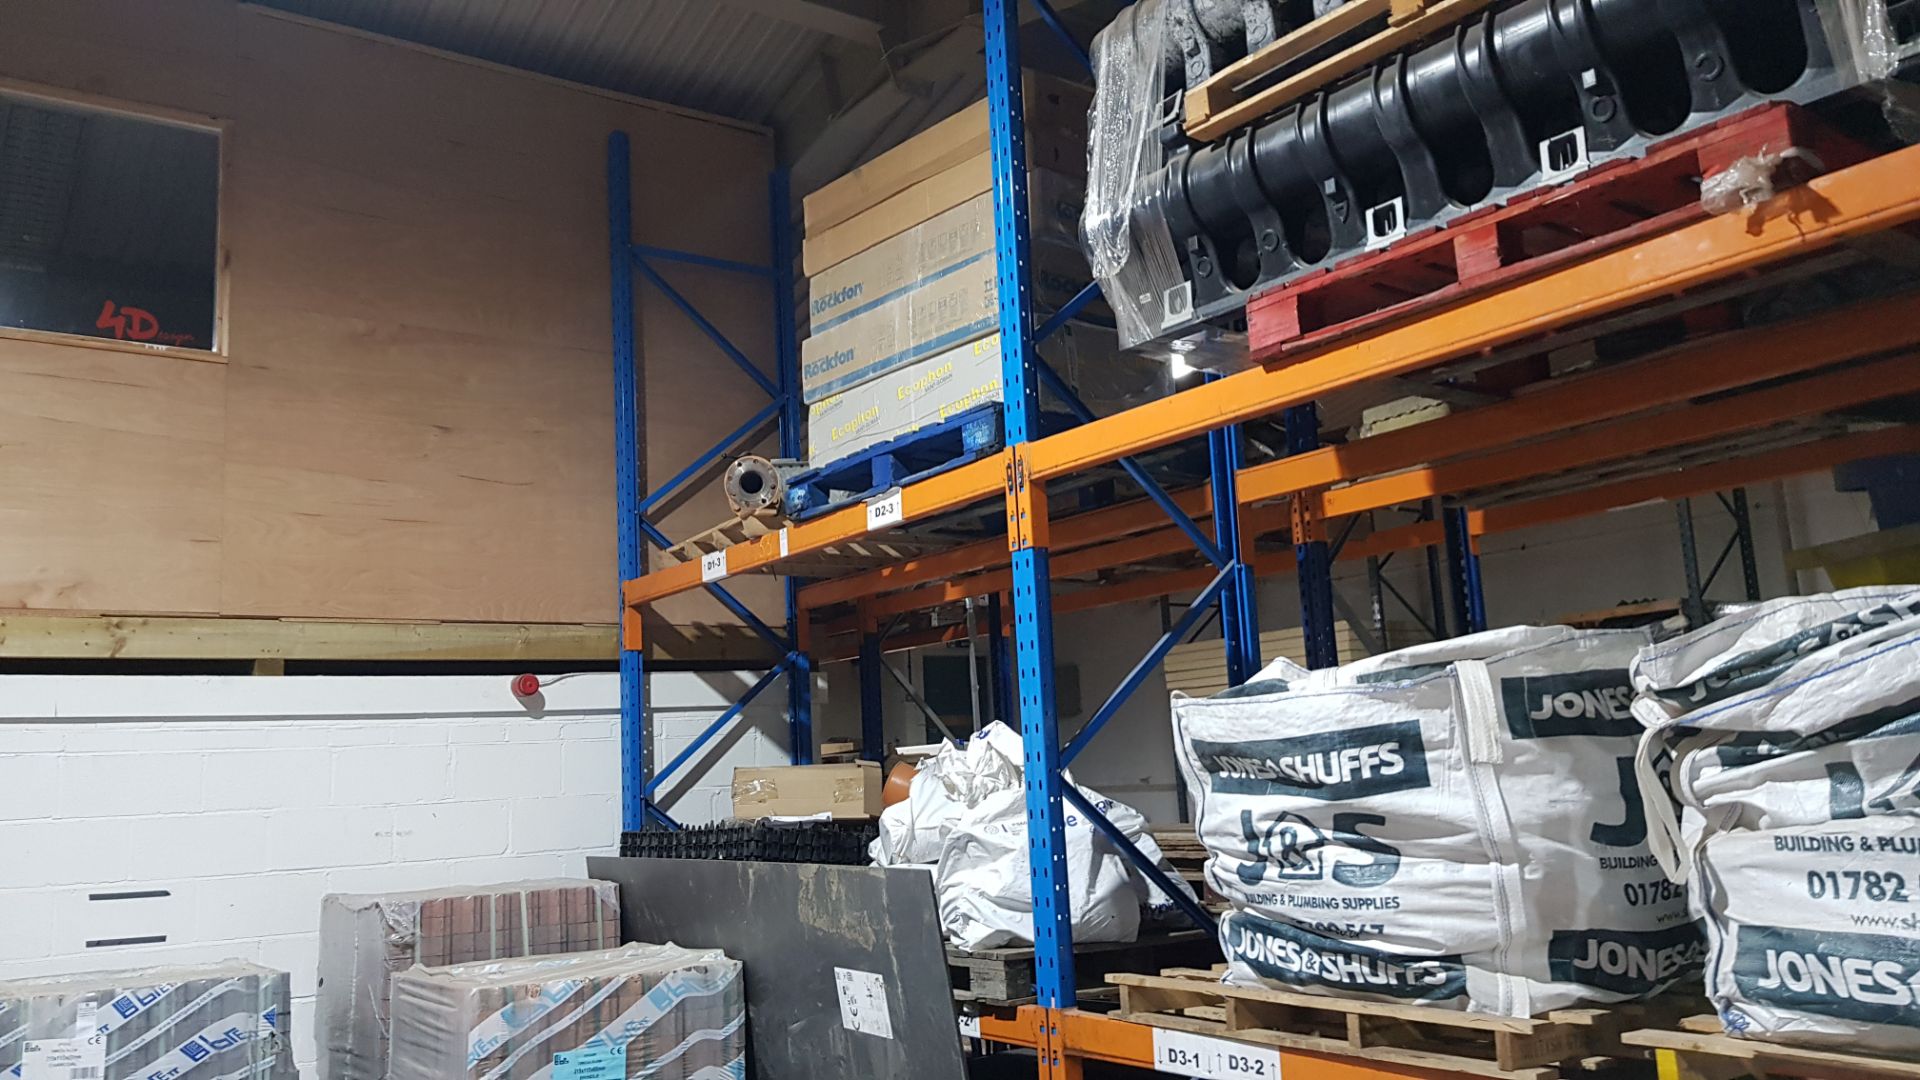 5 X MISC PALLETS OF BUILDING PRODUCTS TO INCLUDE - 1 X PALLET OF COMMERCIAL CABLE, 1 X PALLET OF